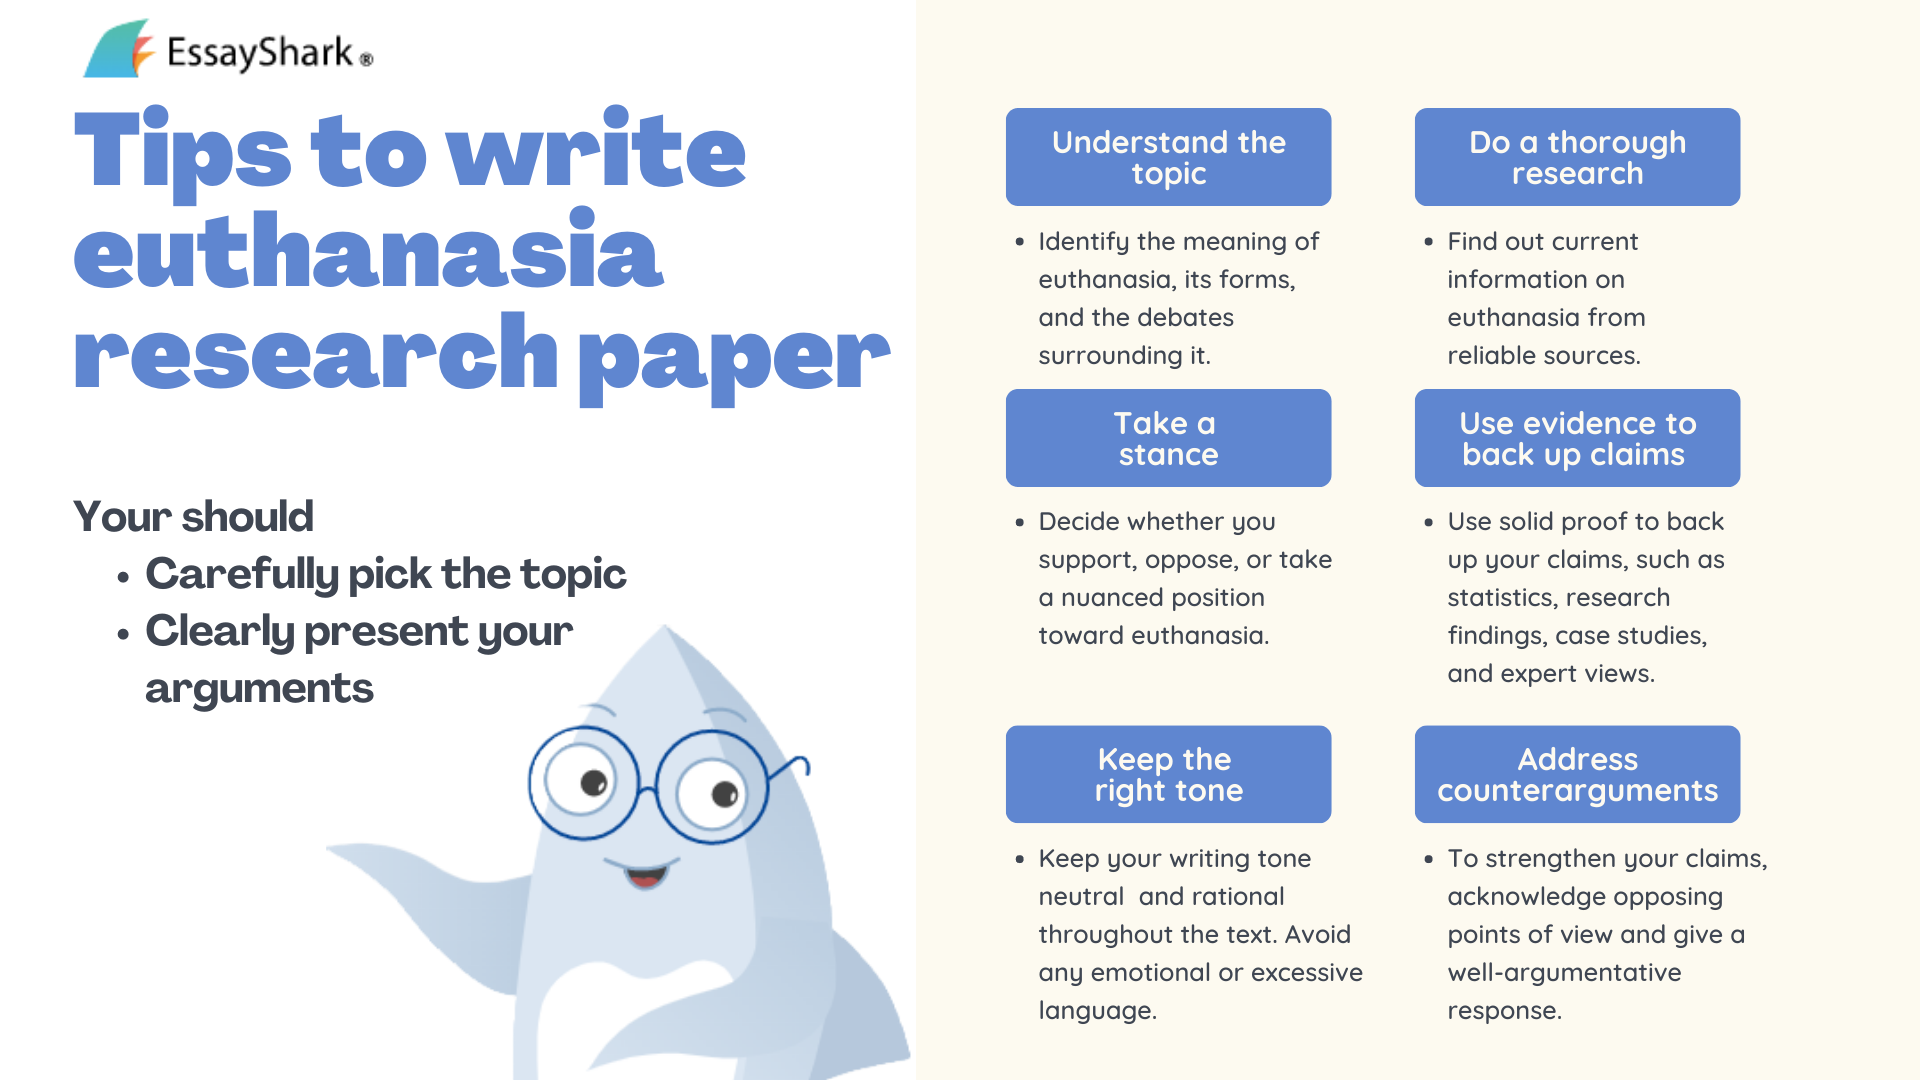 euthanasia research paper writing tips